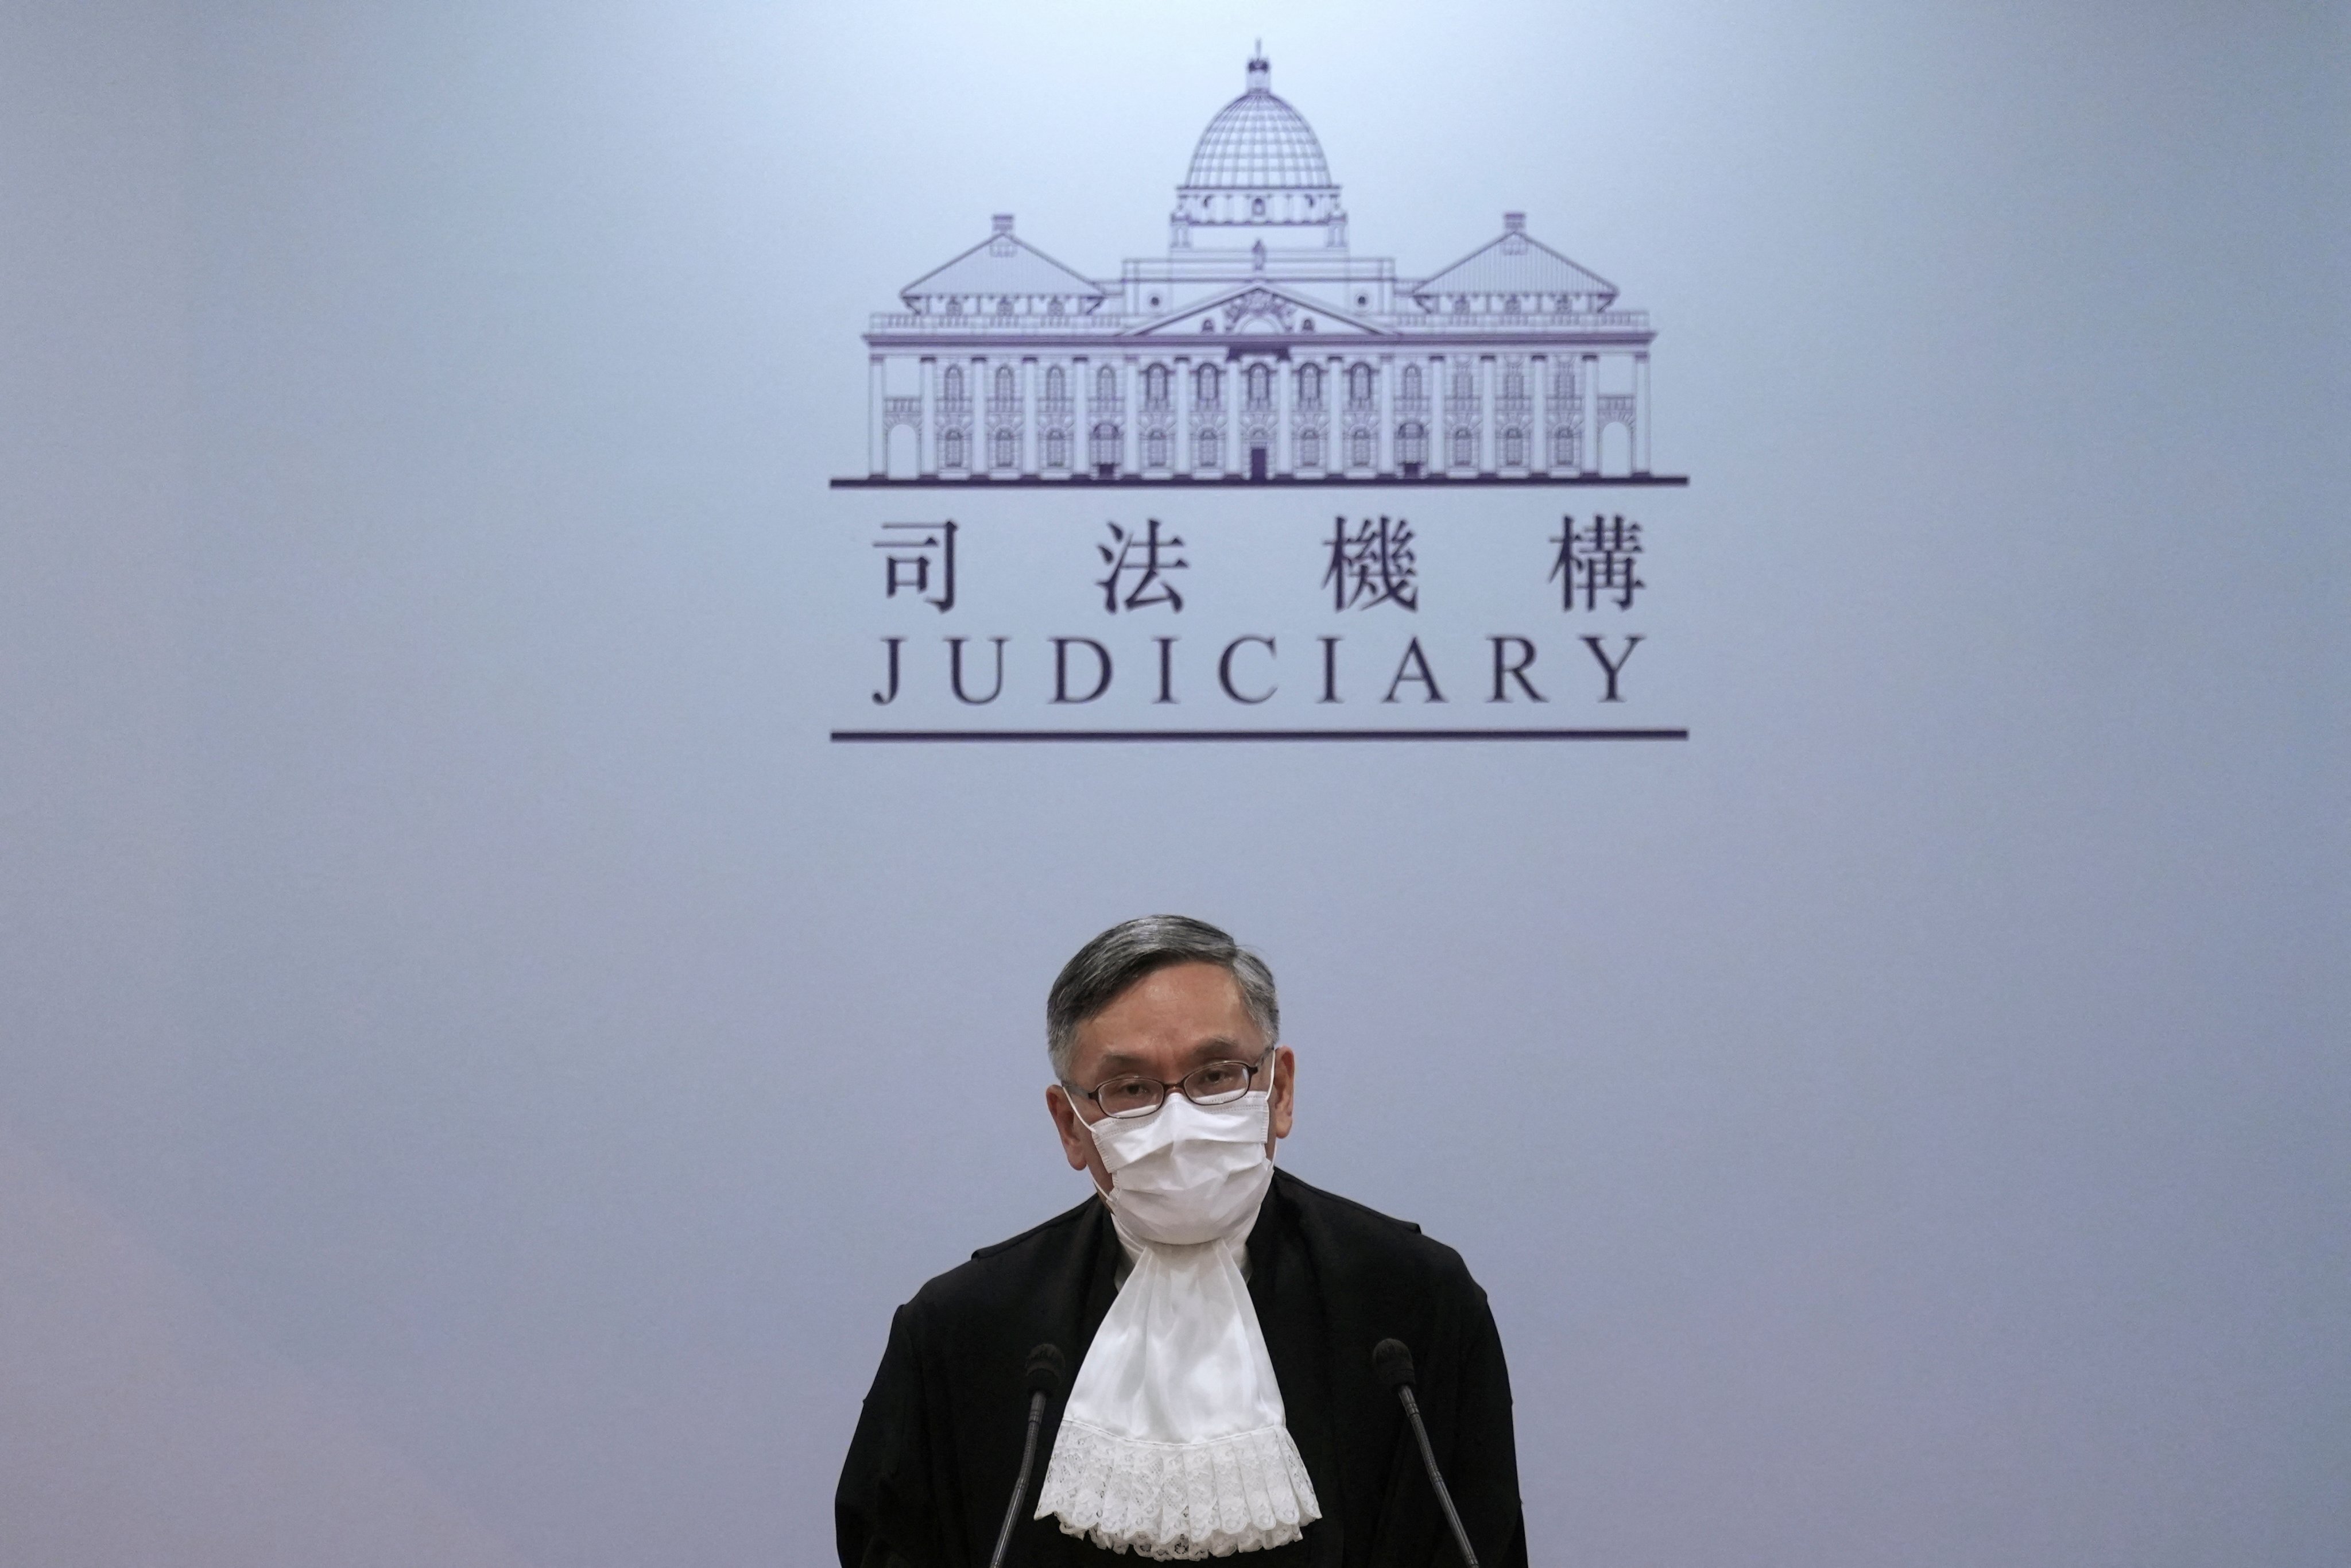 Hong Kong Chief Justice Andrew Cheung meets the press at the High Court after attending the opening of the new legal year in Hong Kong on January 24. Cheung made clear that “there is no question of the impartiality of our courts being affected by this special arrangement under Article 44”. Photo: Reuters 